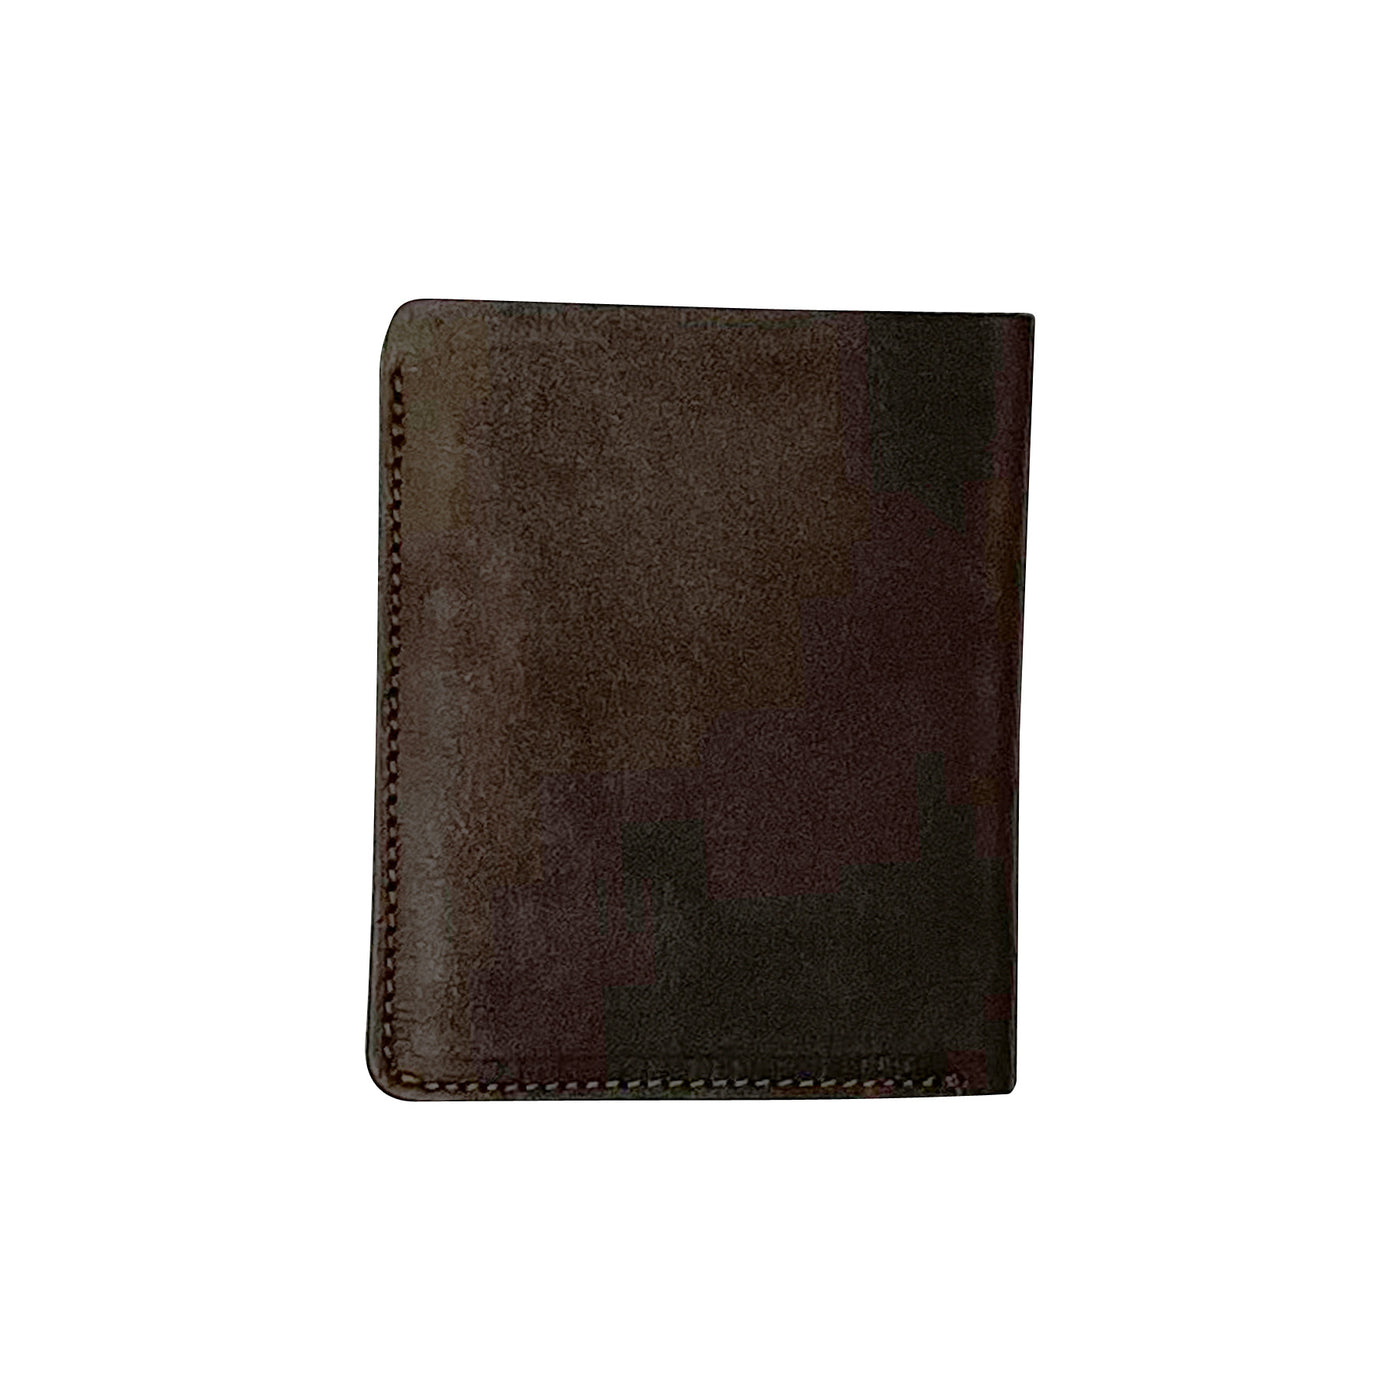 Thedi Leathers Wallet Card Holder Brown